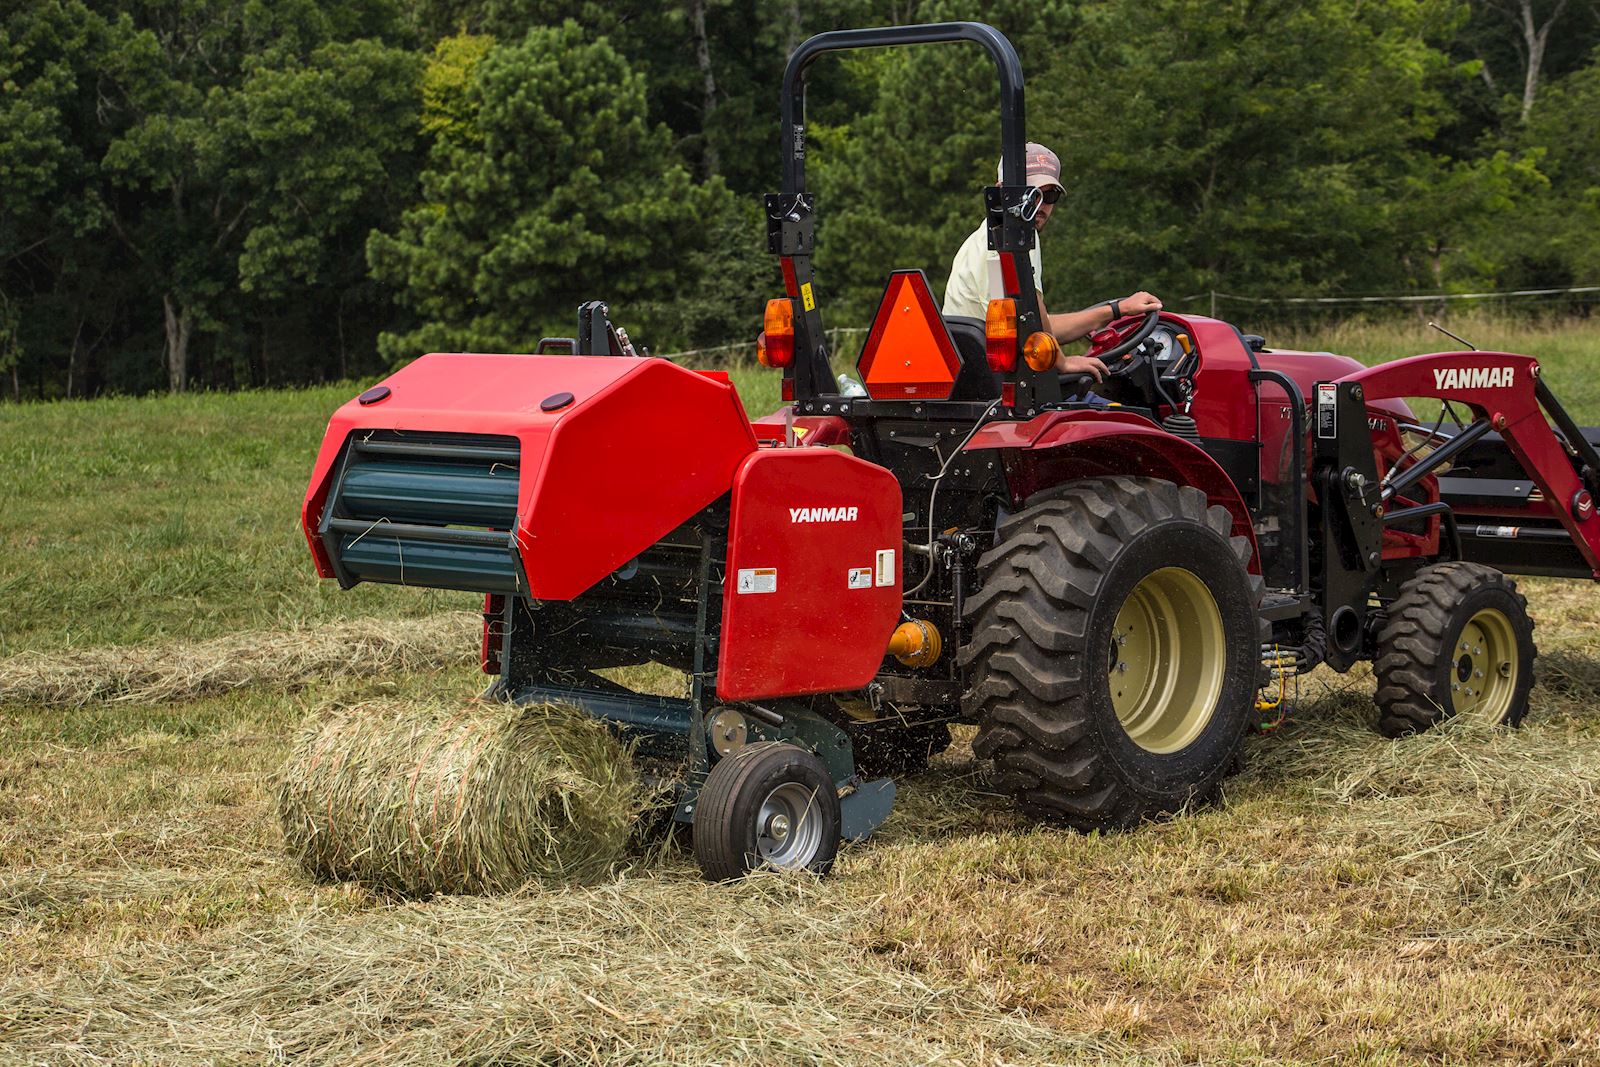 Choosing The Right Baler For Your Small Farm Operation